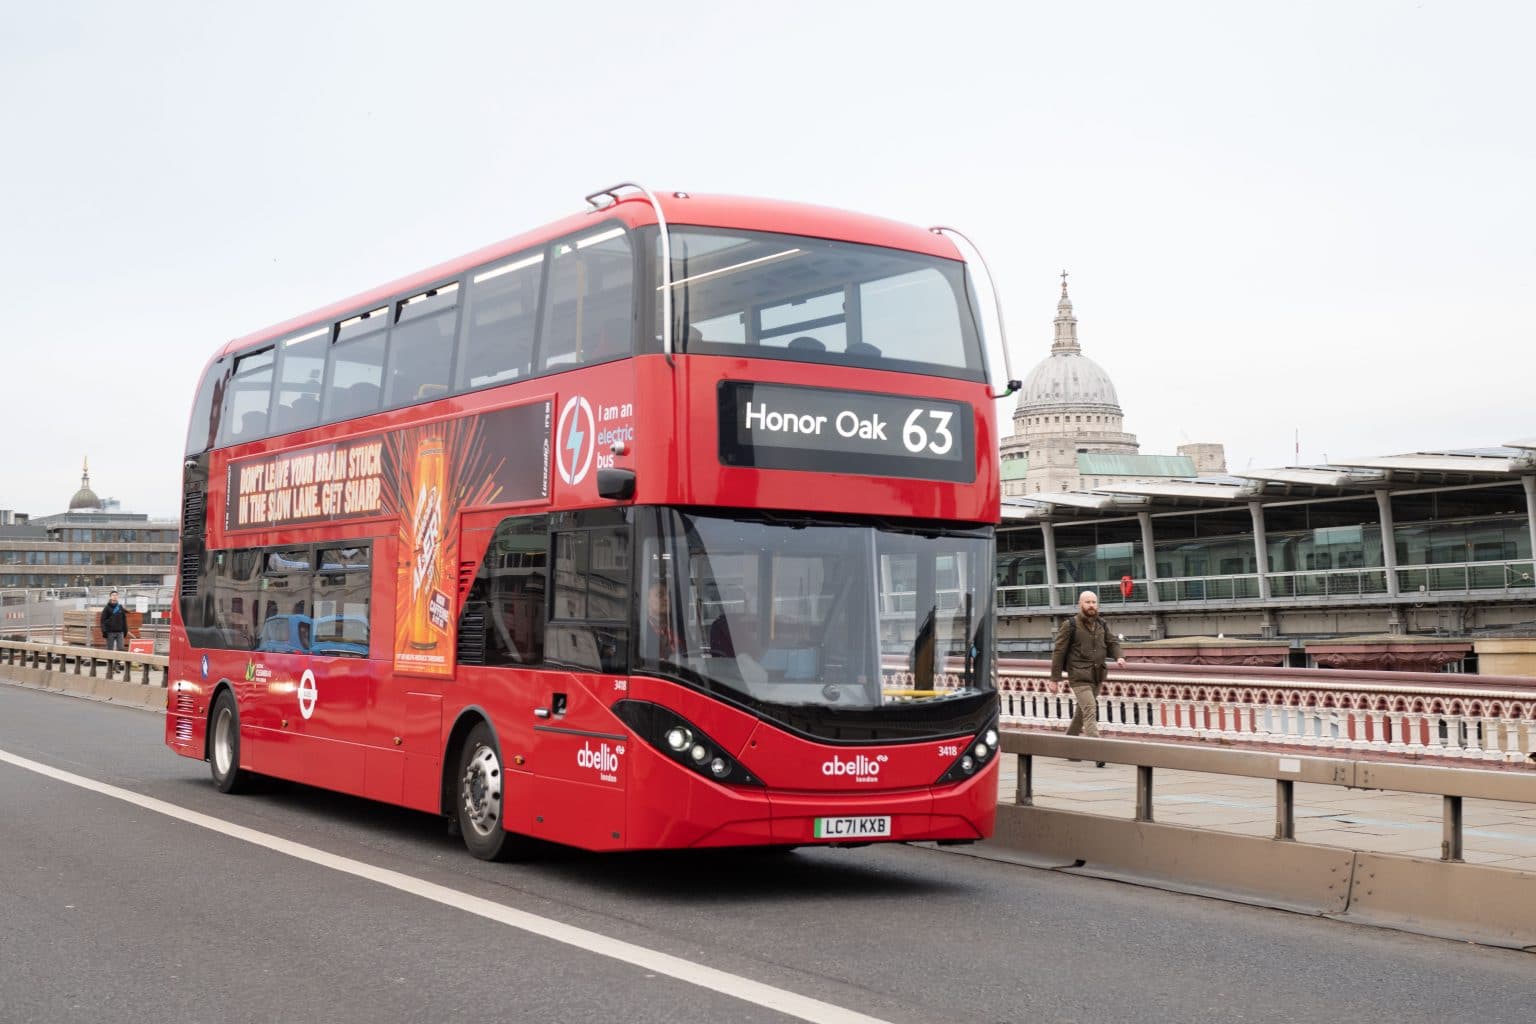 BYD ADL Partnership Delivers 29 Enviro400EV Electric Buses to Abellio London